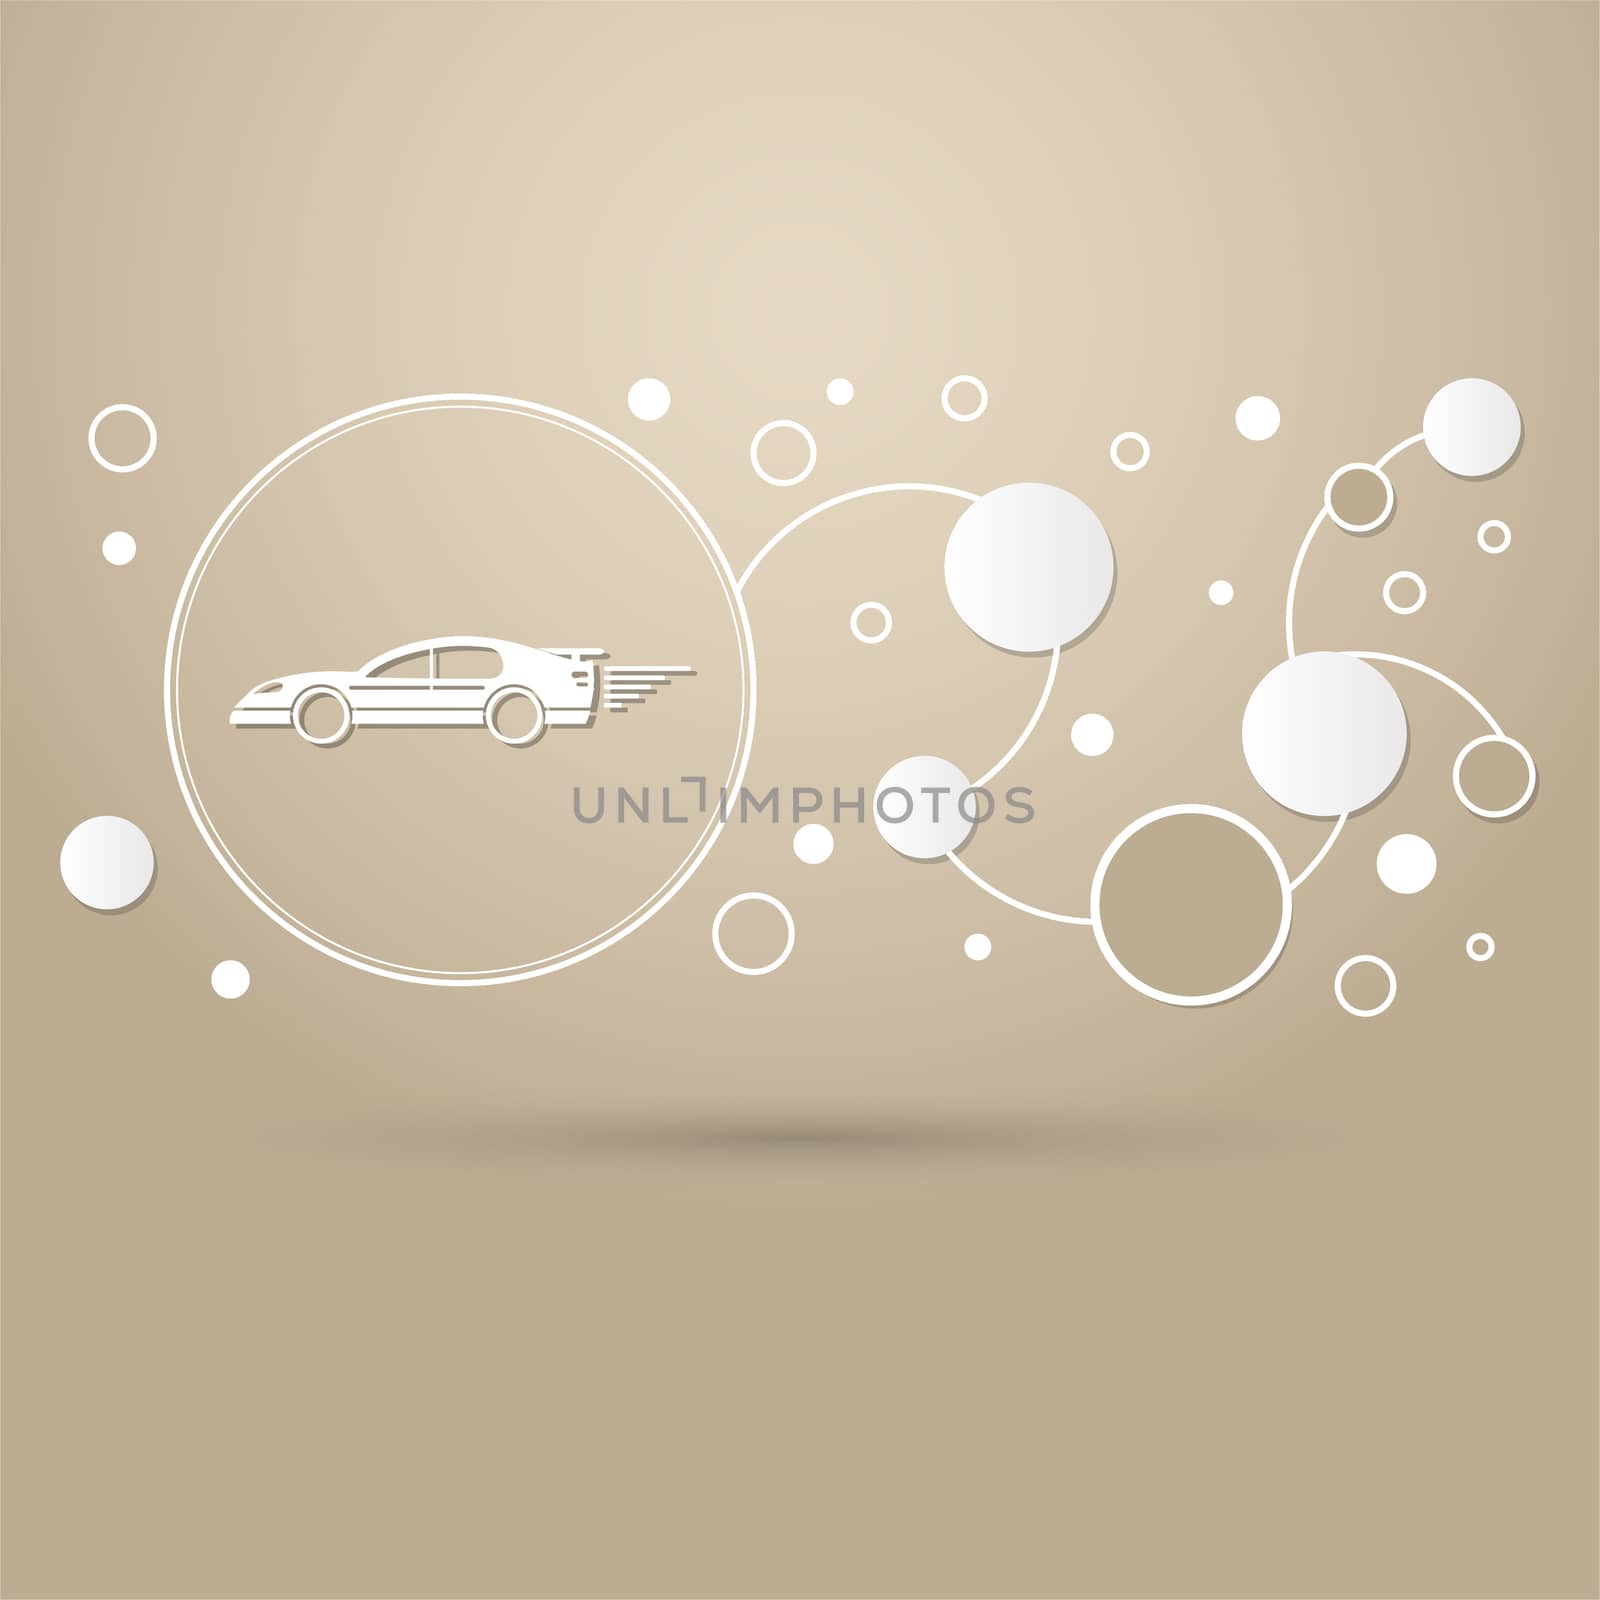 Super Car icon on a brown background with elegant style and modern design infographic.  by Adamchuk